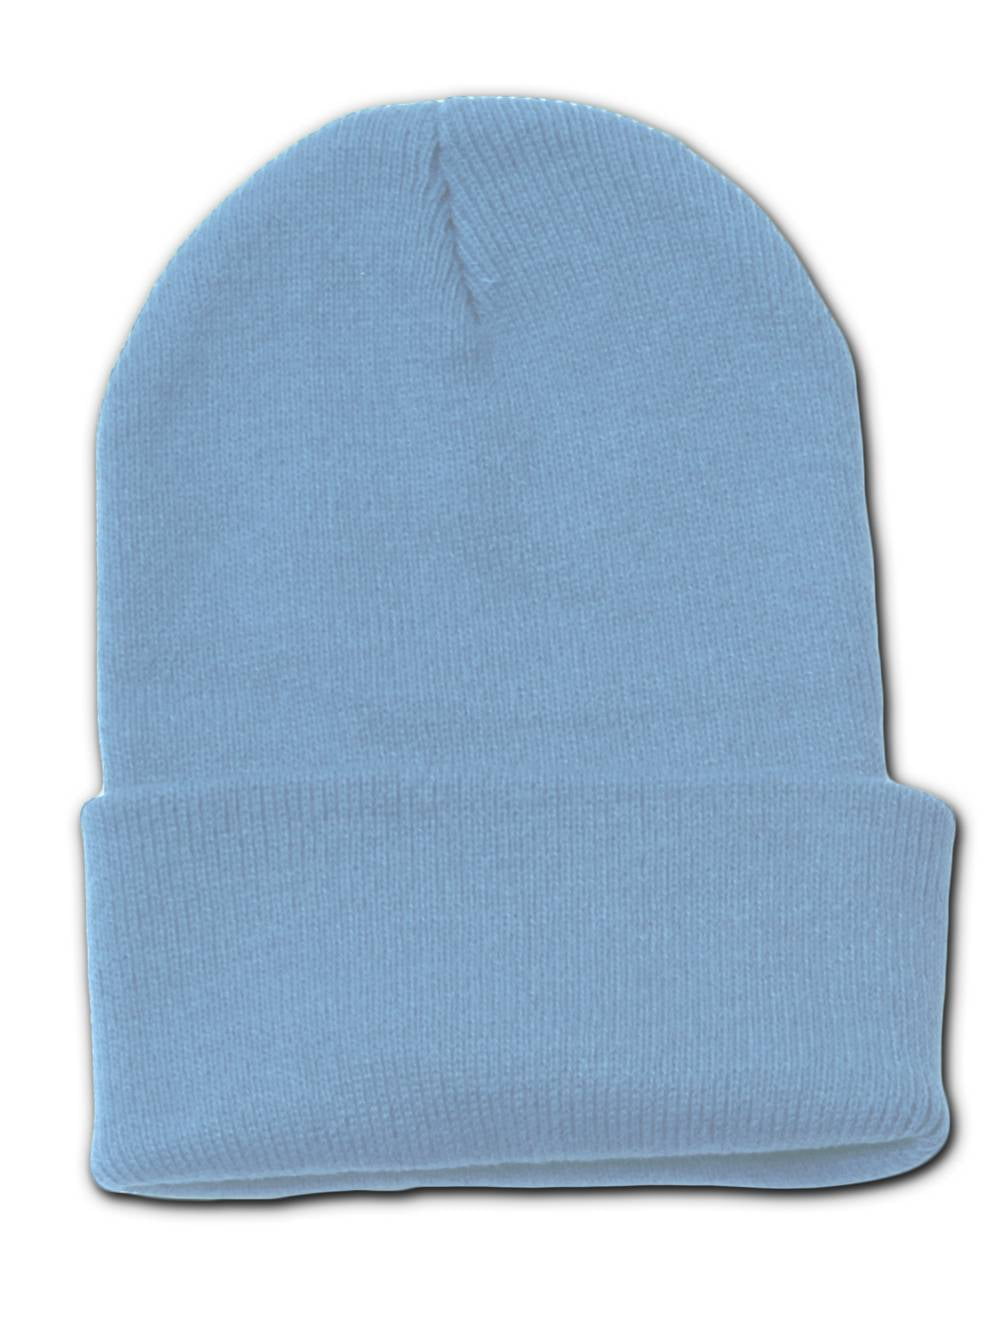 New Roots Winter Hat Tuque Winter Blue One Size Fits All Beanie Unisex 